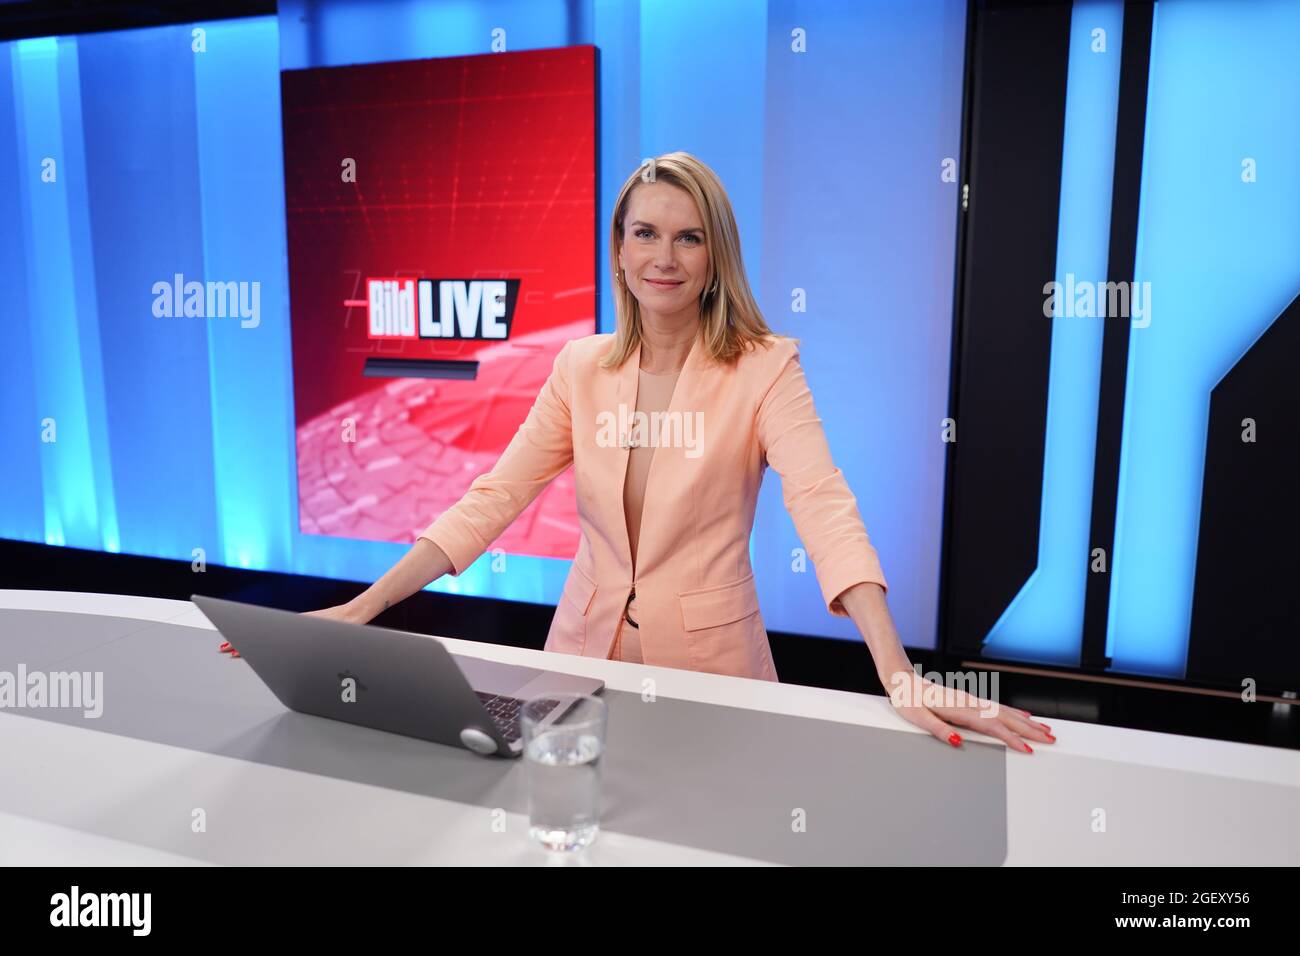 Berlin, Germany. 16th Aug, 2021. Janina Kirsch, BILD show boss and host of  the program "Jetzt reden Vier", stands in the studio of the TV station  "Bild". The new TV station "Bild"